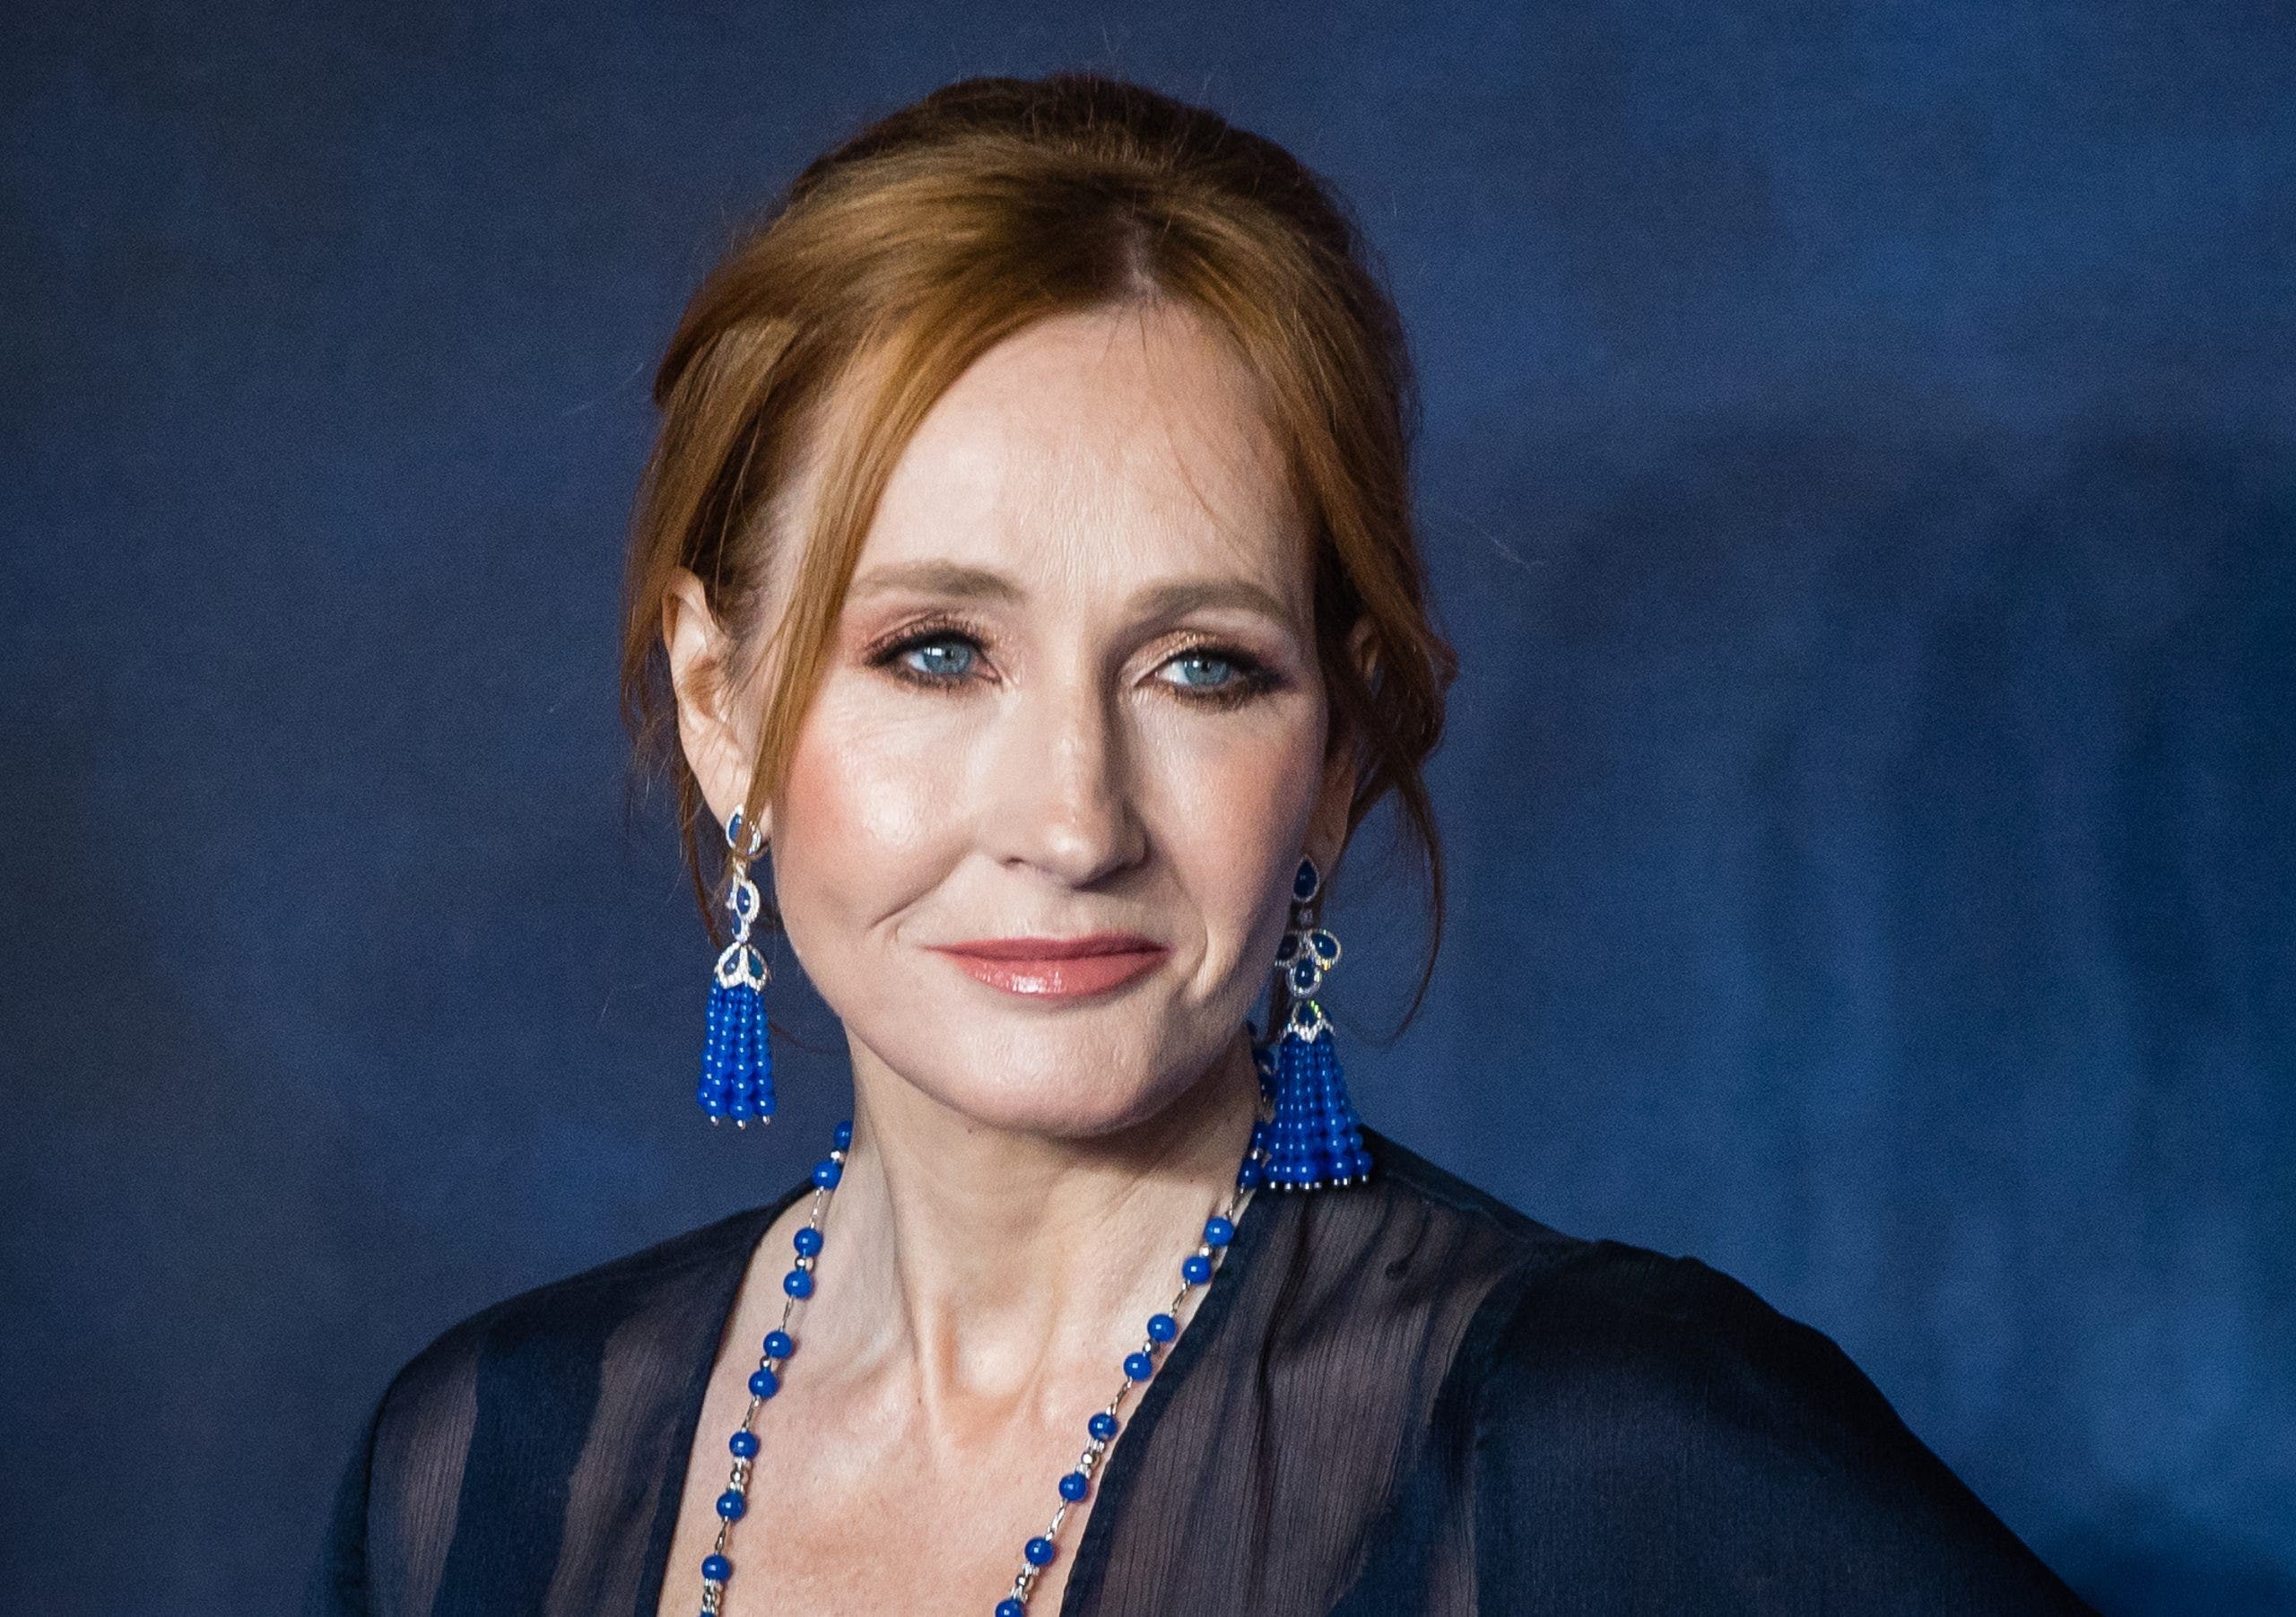 jk rowling says 'harry potter' stars who criticized her trans views can 'save their apologies'